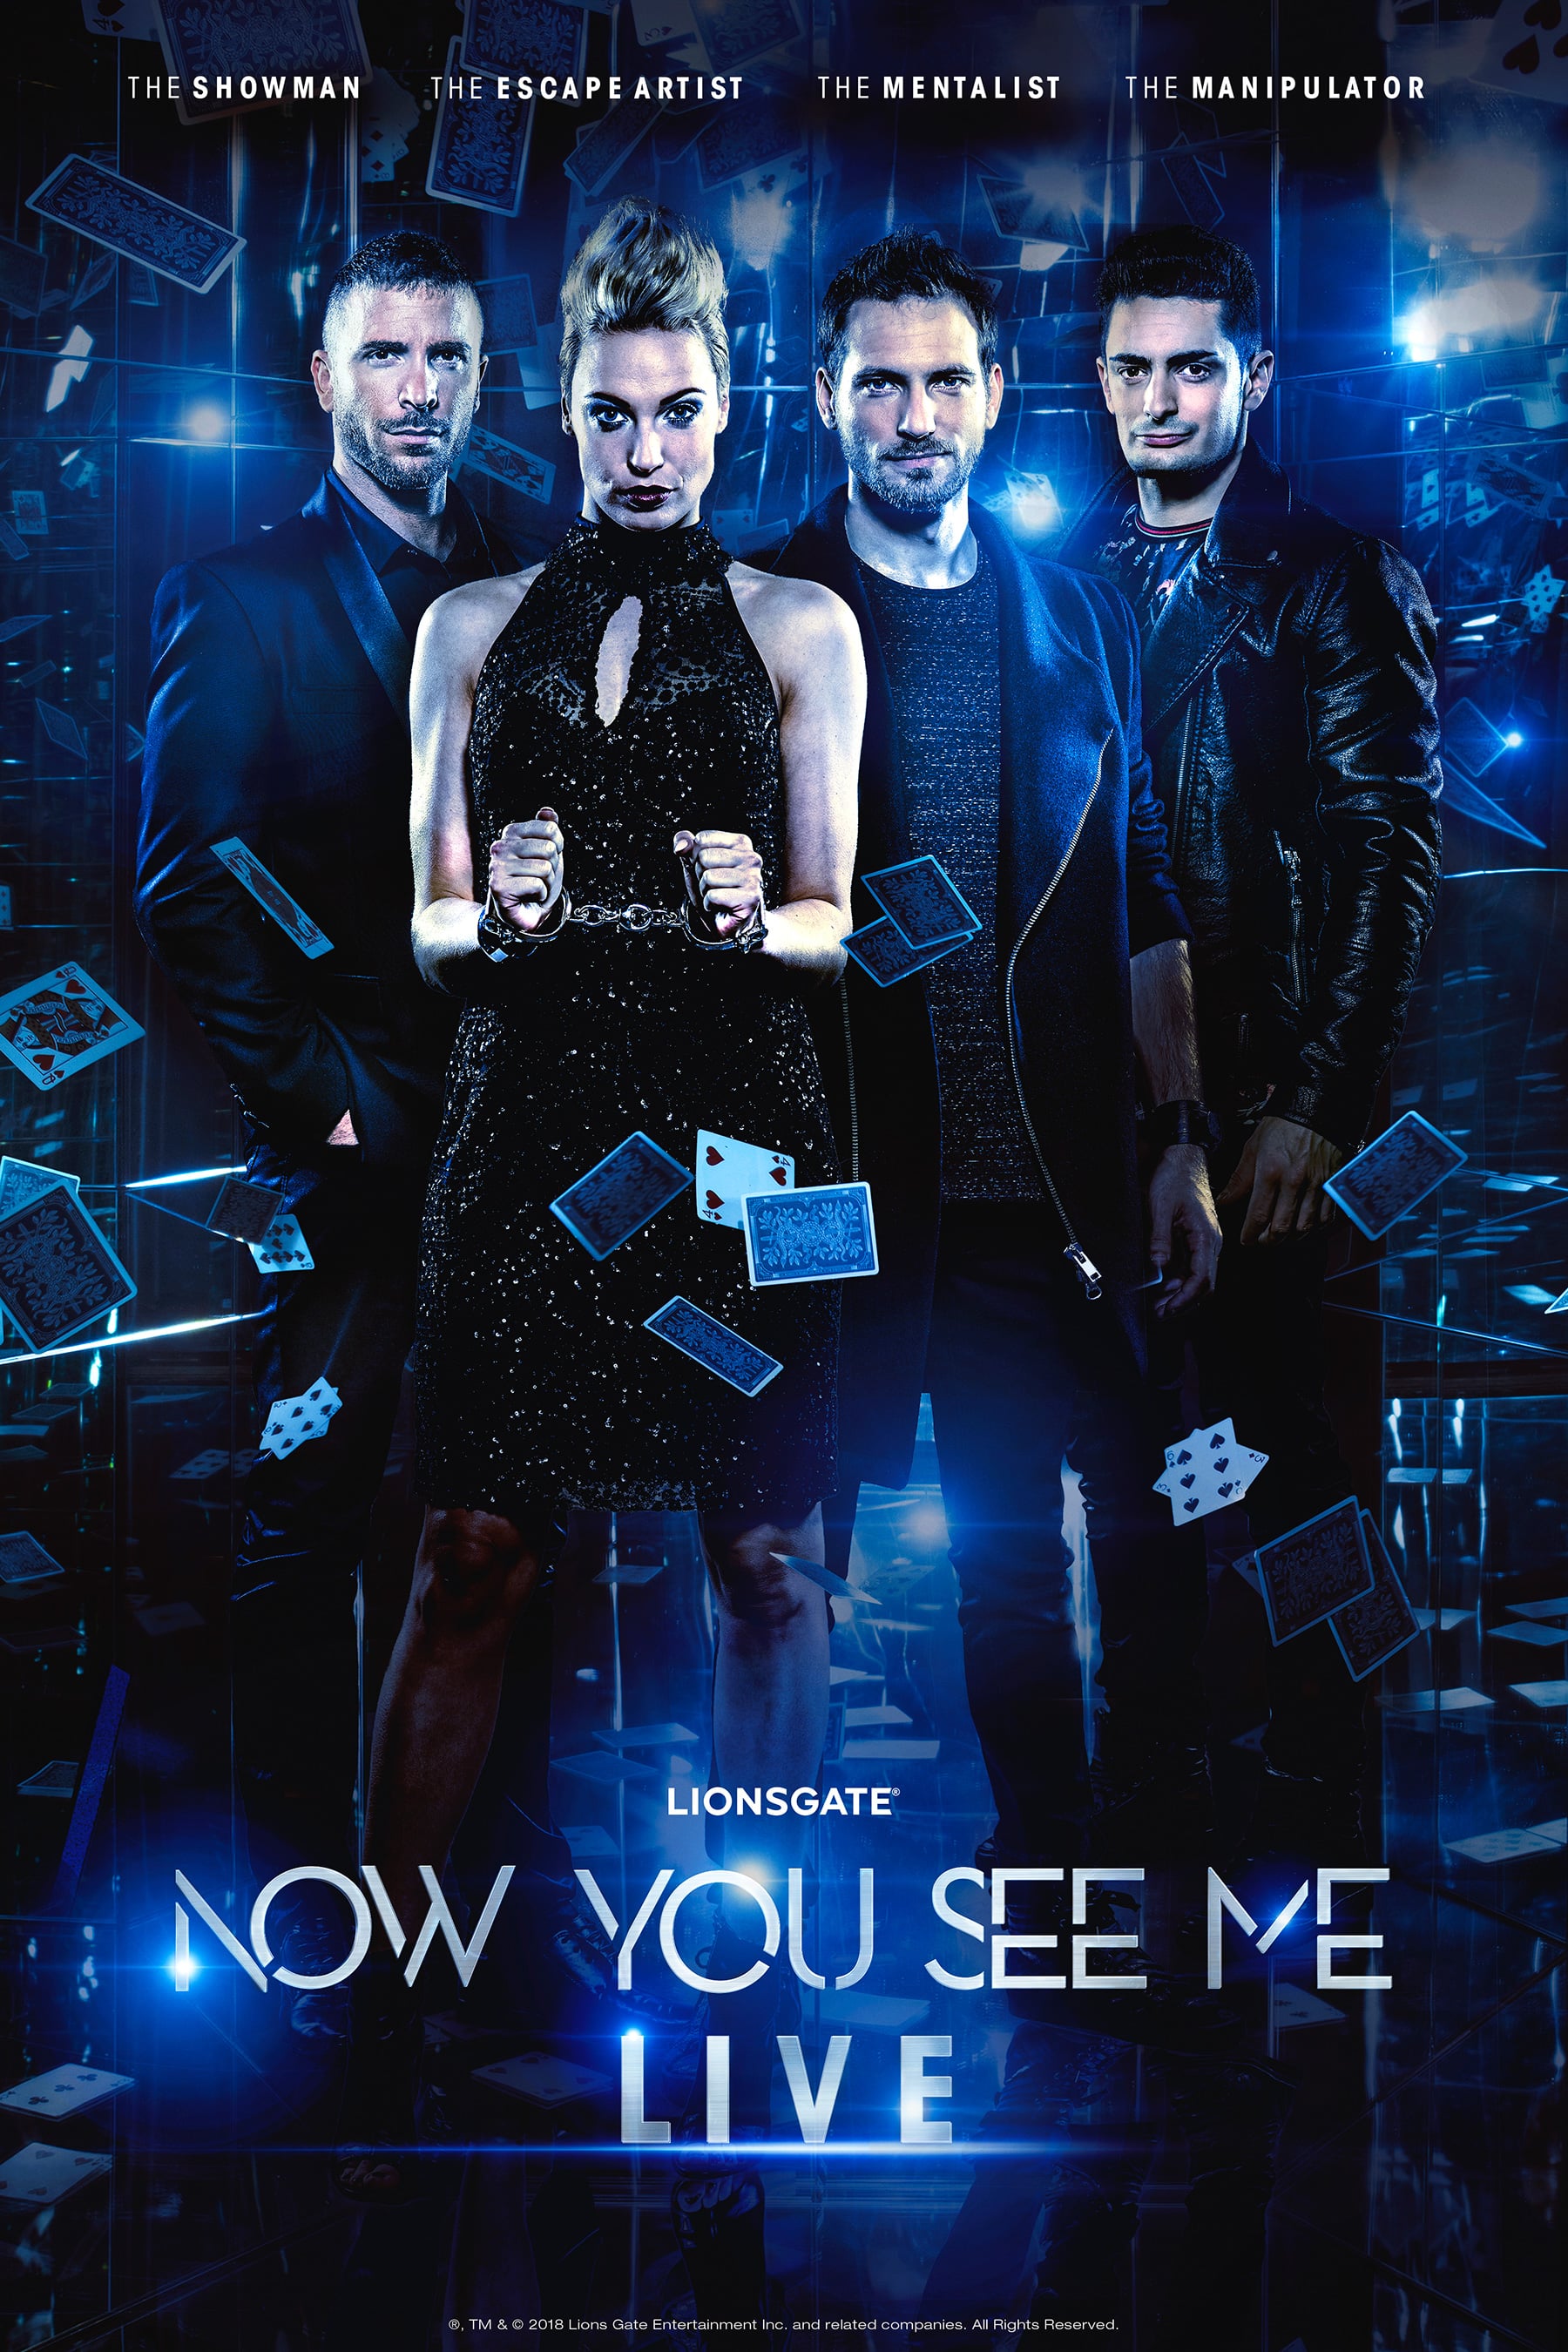 Now You See Me 3 Download full movies 2021